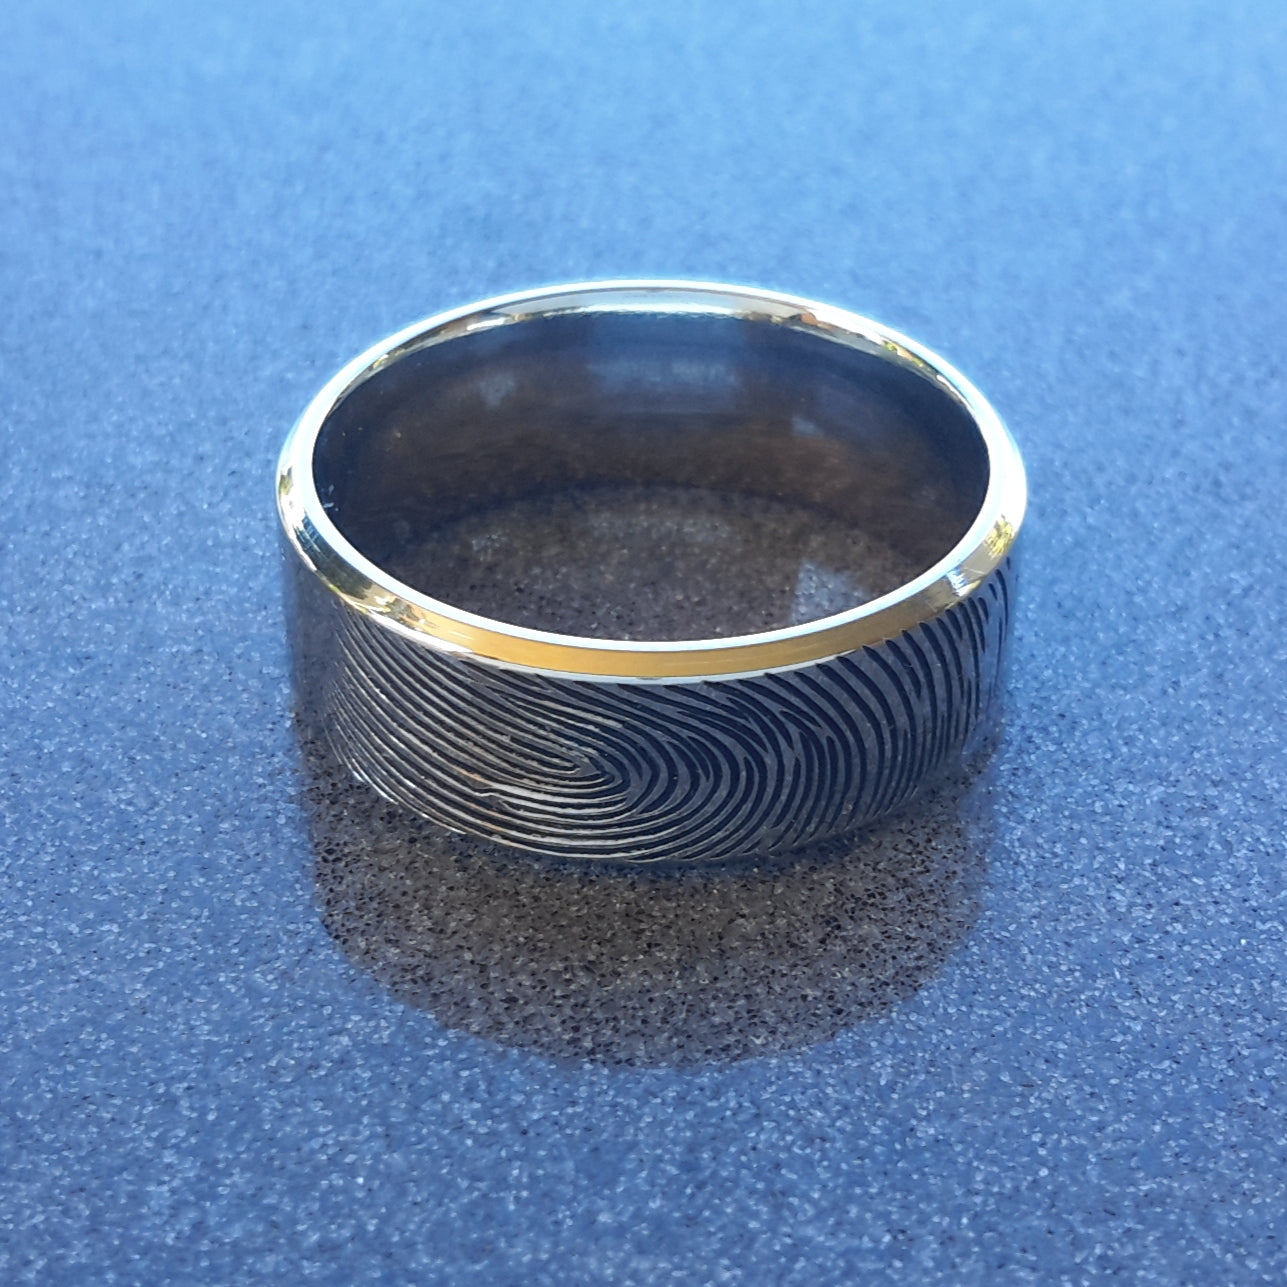 Men's wedding Ring with her Finger Print engraved on.